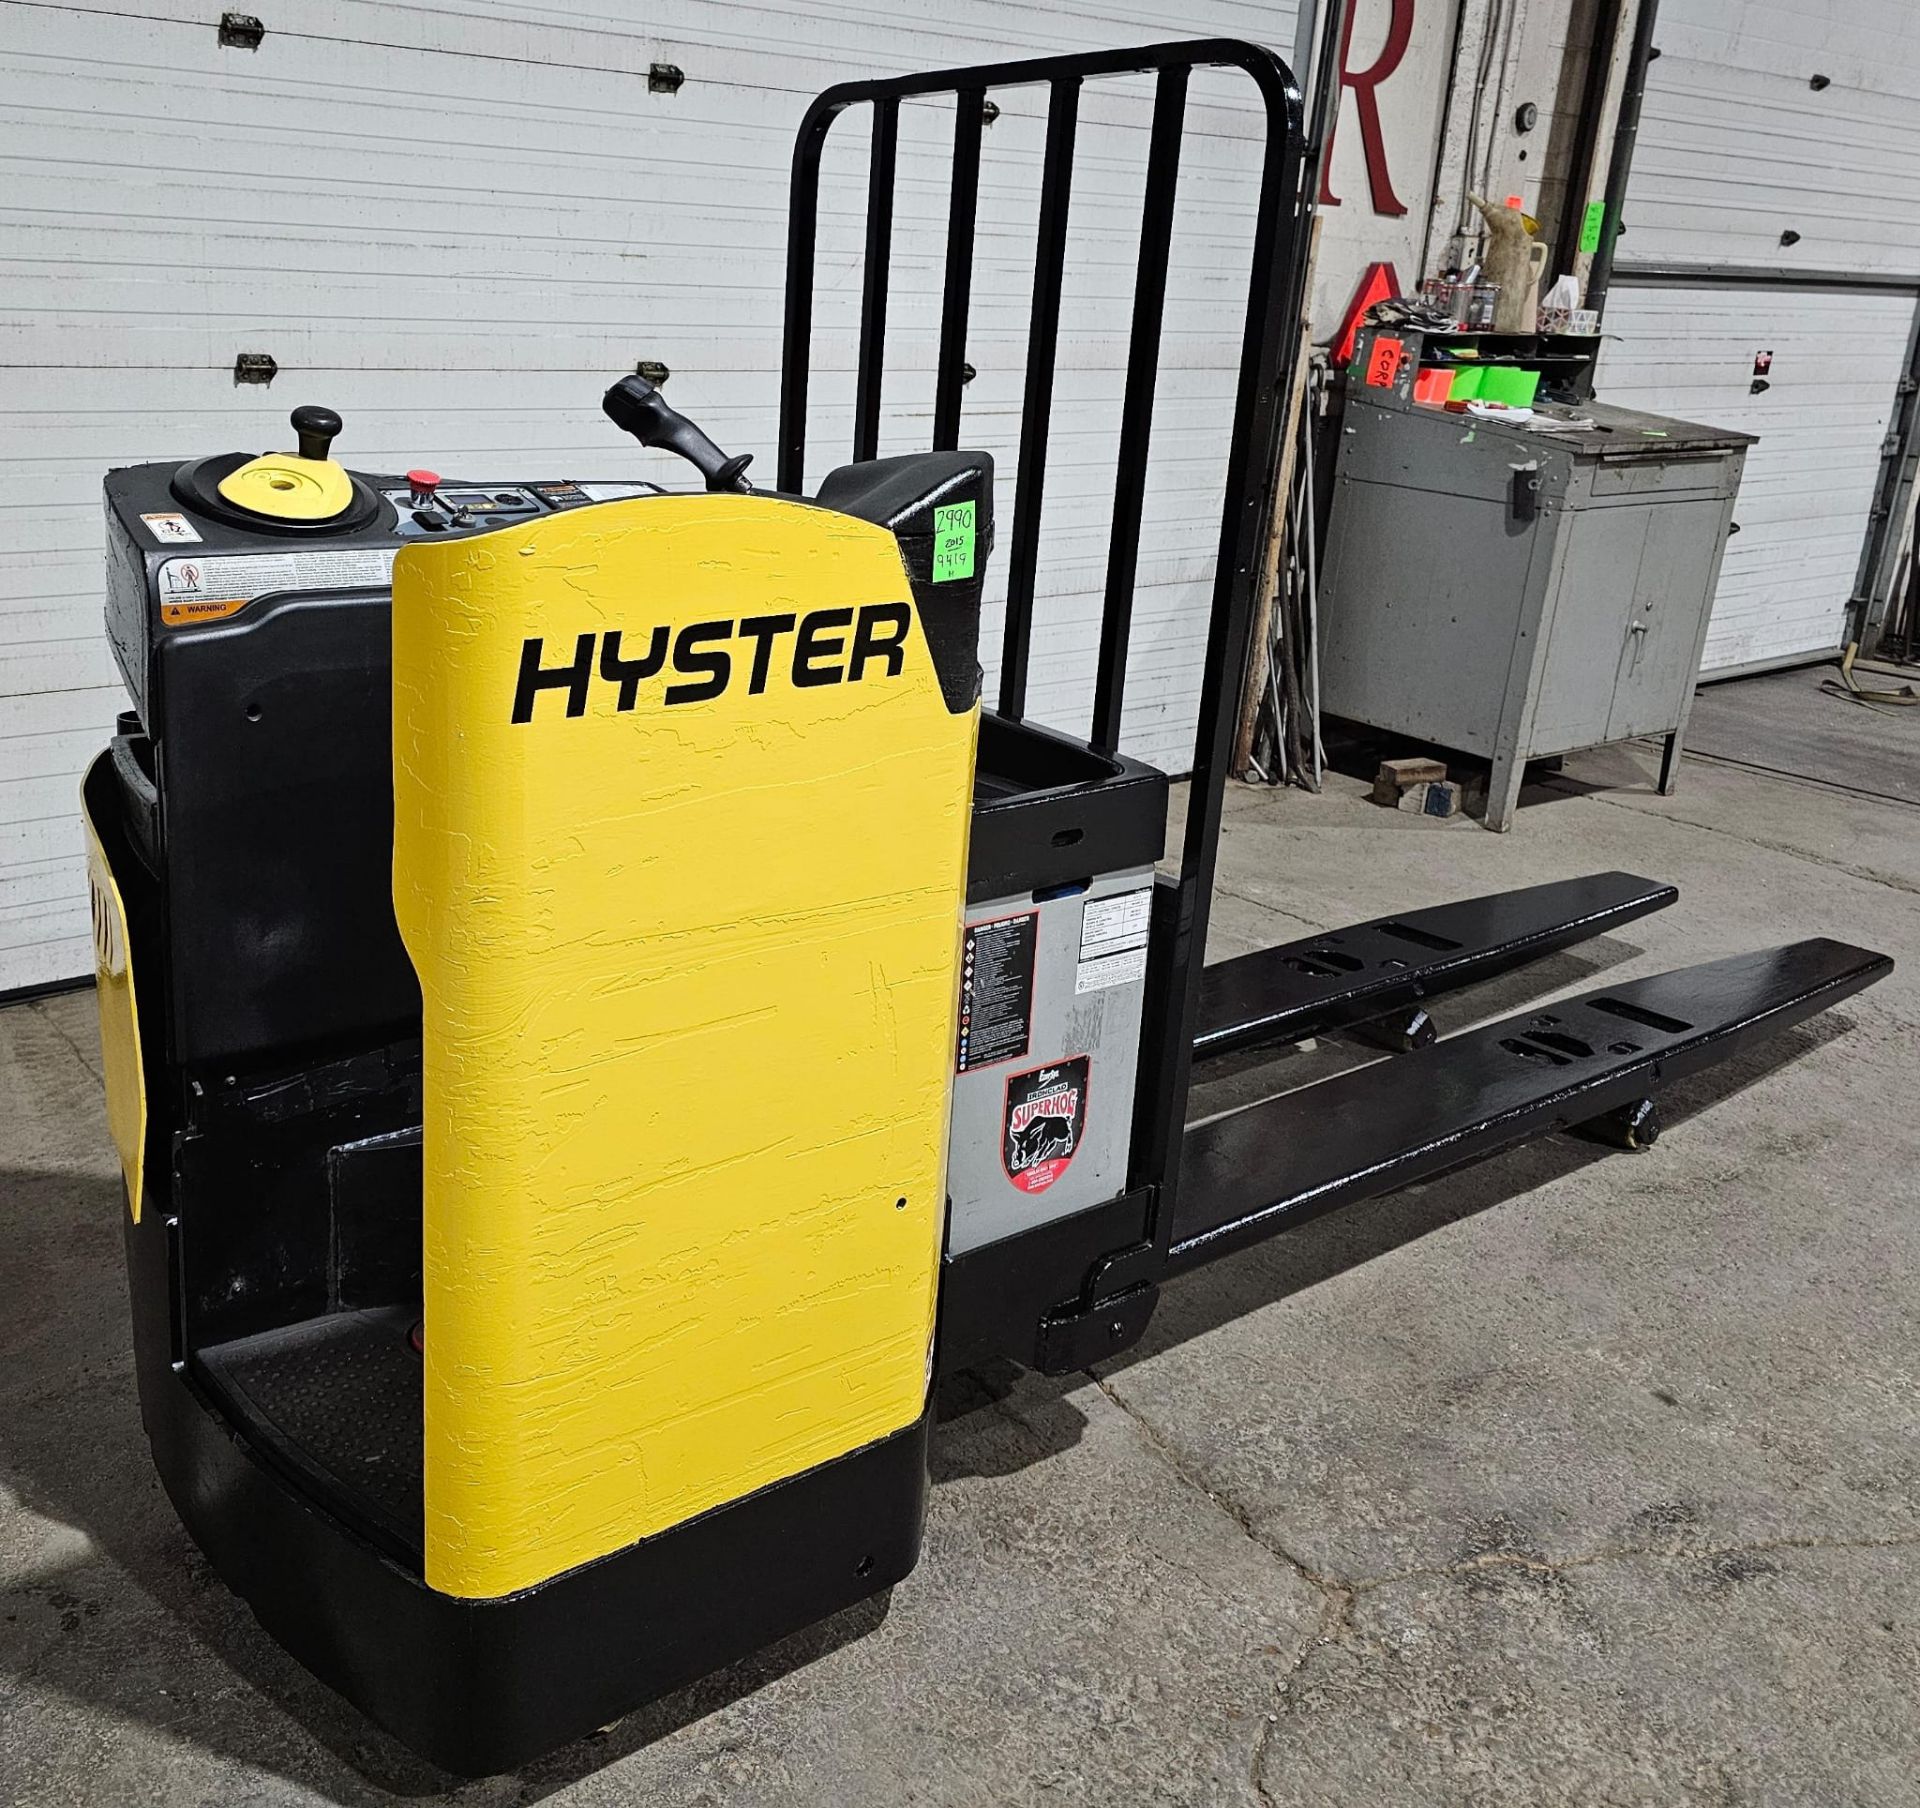 2015 Hyster Long John RIDE ON 8000lbs capacity 96" Forks Powered Pallet Cart 24V - Ride on unit - Image 4 of 5